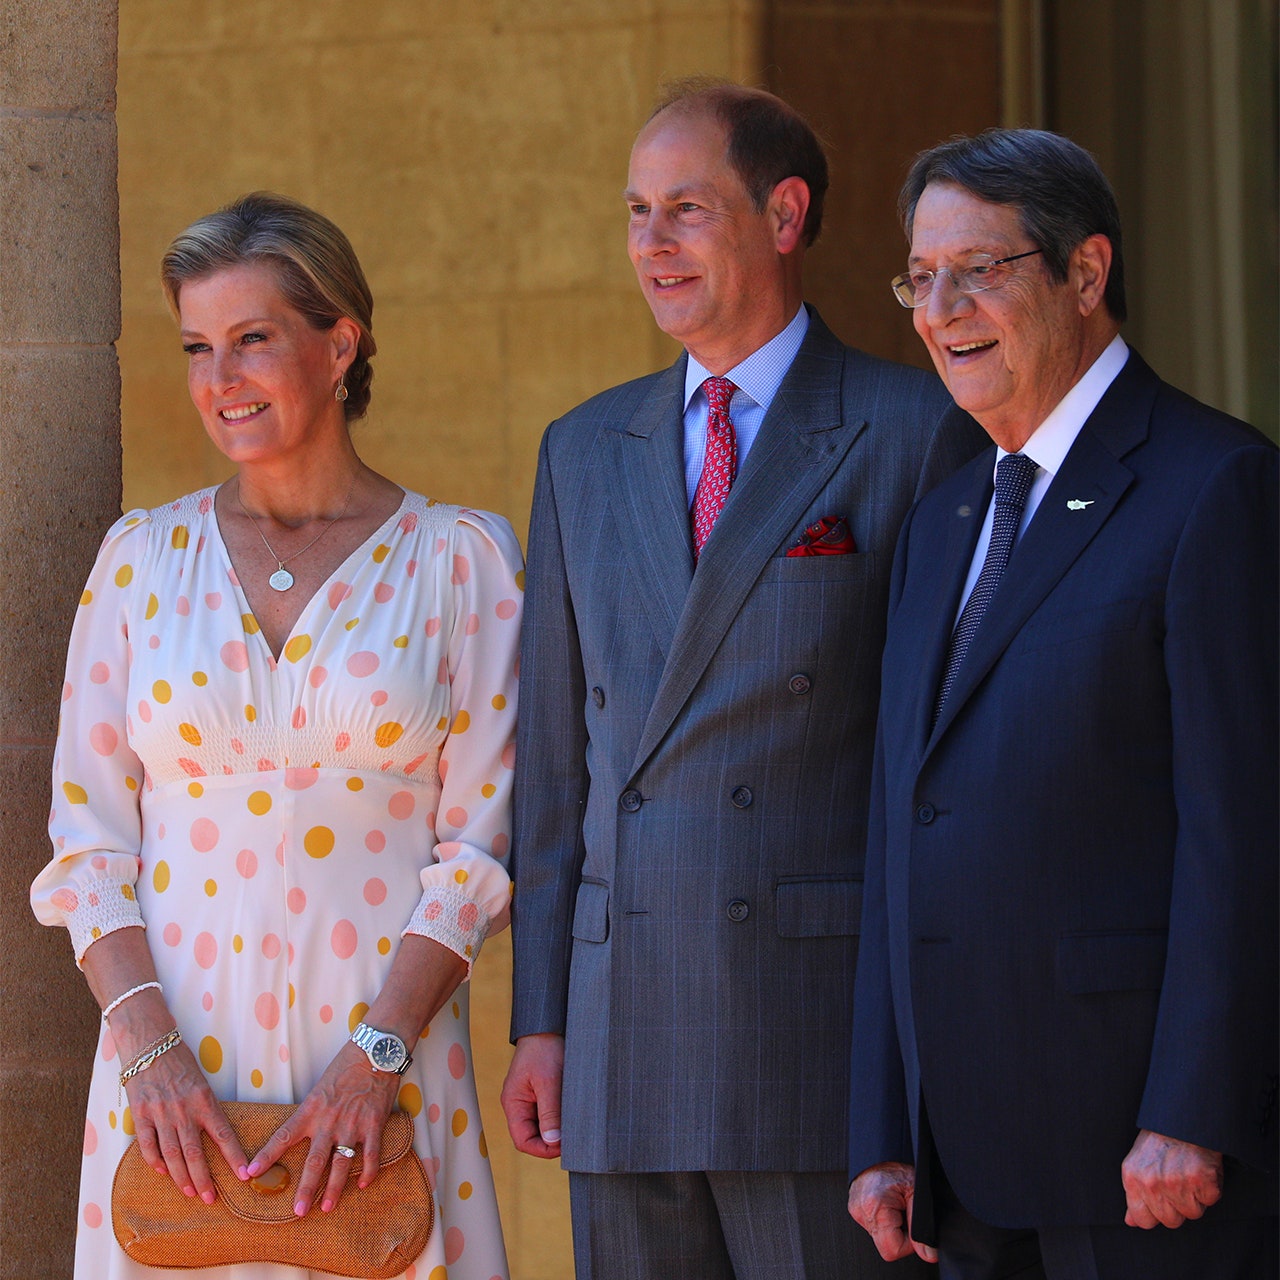 the-countess-of-wessex-masters-vibrant-diplomatic-dressing-in-cyprus